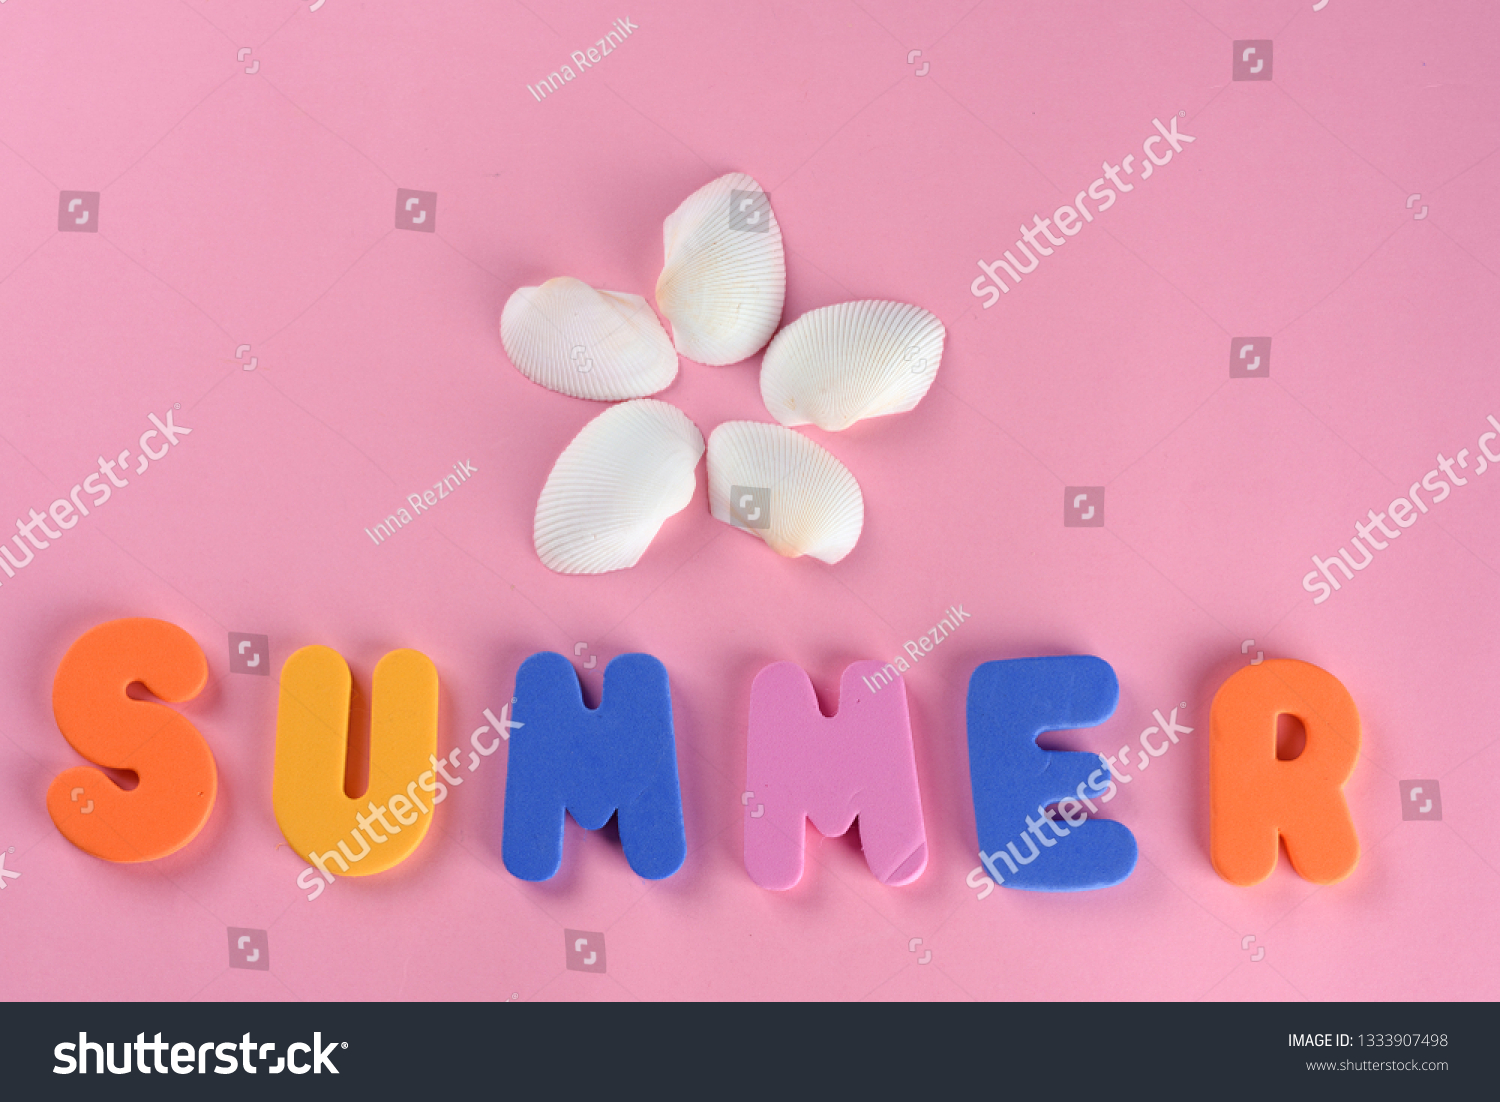 Word SUMMER letters and seashell or sea shell on pink textured background. Original idea from natural material for summer design. Flat lay. #1333907498